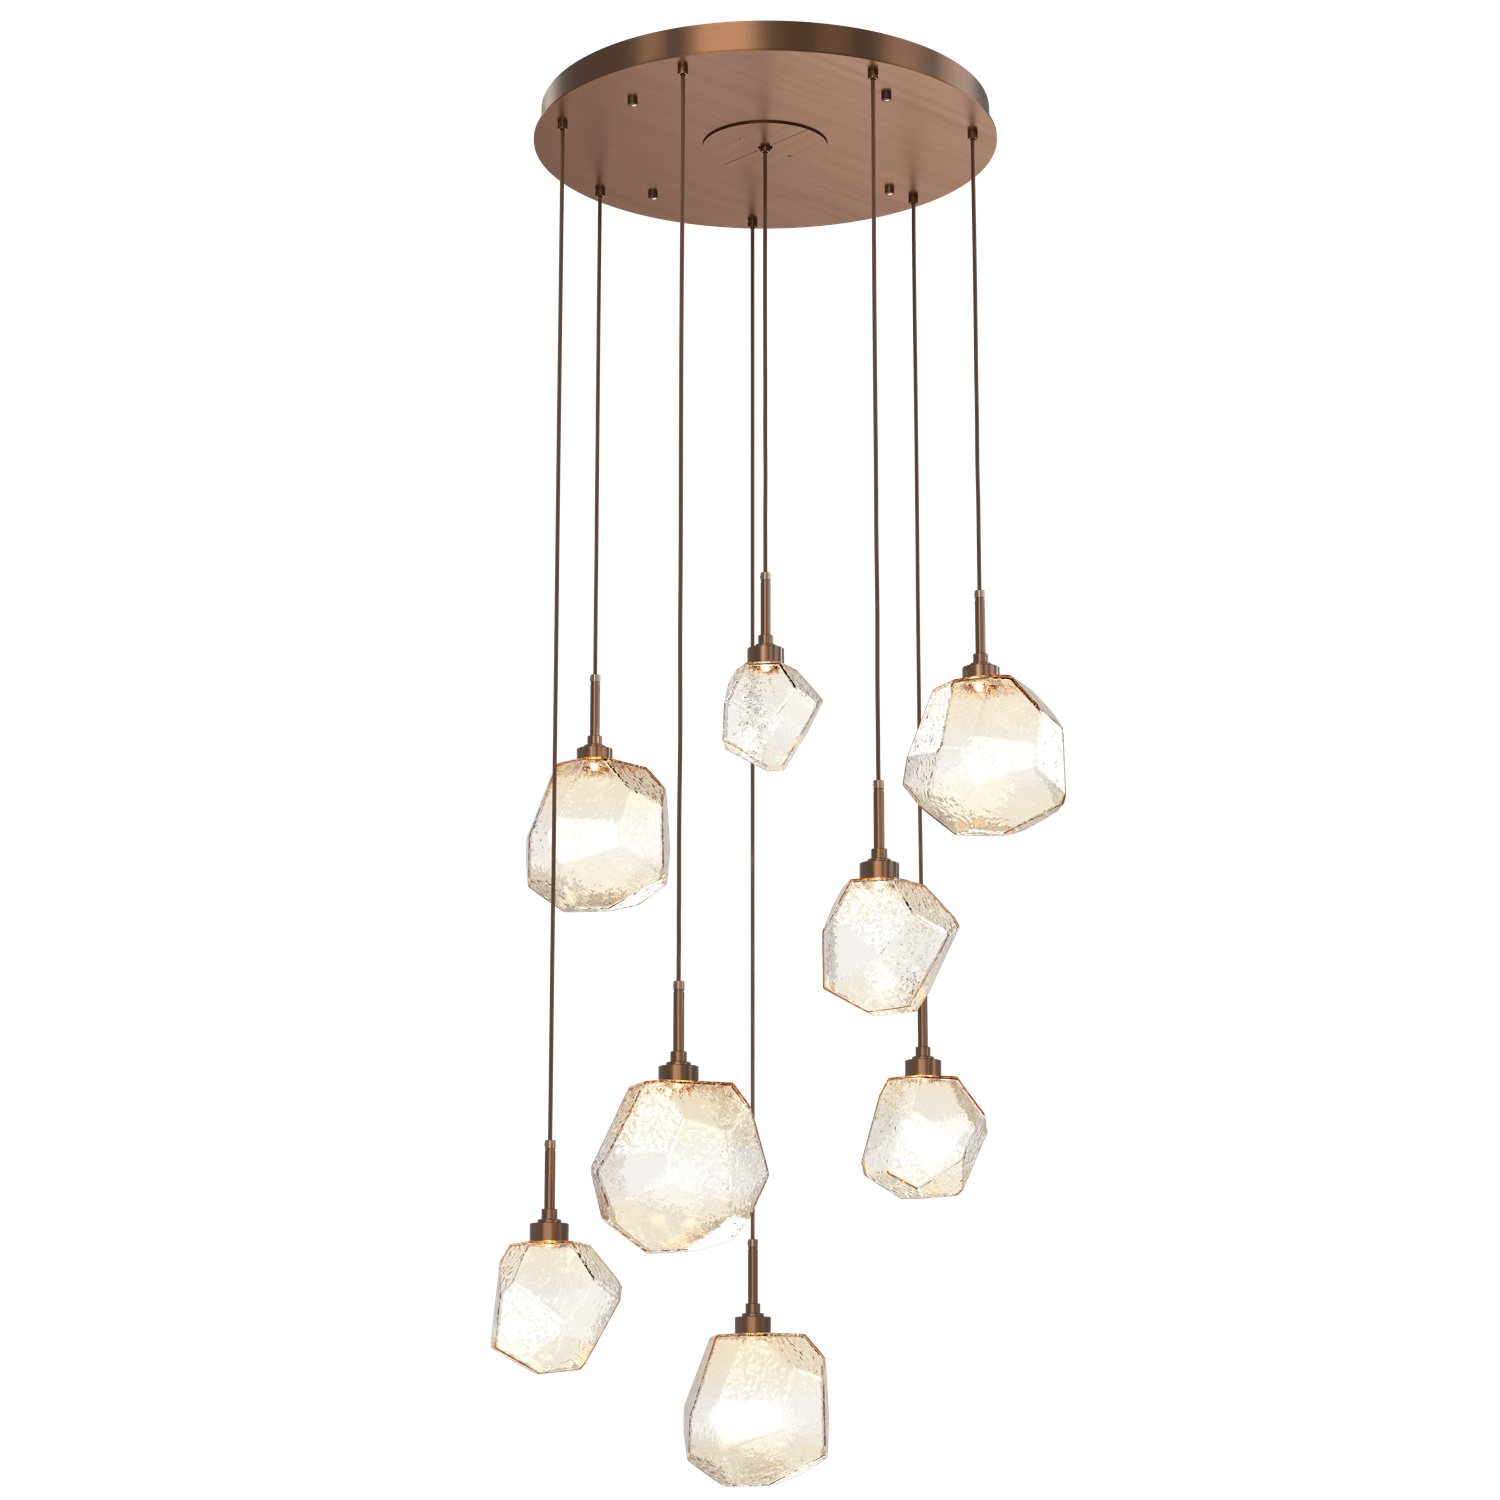 CHB0039-08-RB-A-Hammerton-Studio-Gem-8-light-round-pendant-chandelier-with-oil-rubbed-bronze-finish-and-amber-blown-glass-shades-and-LED-lamping